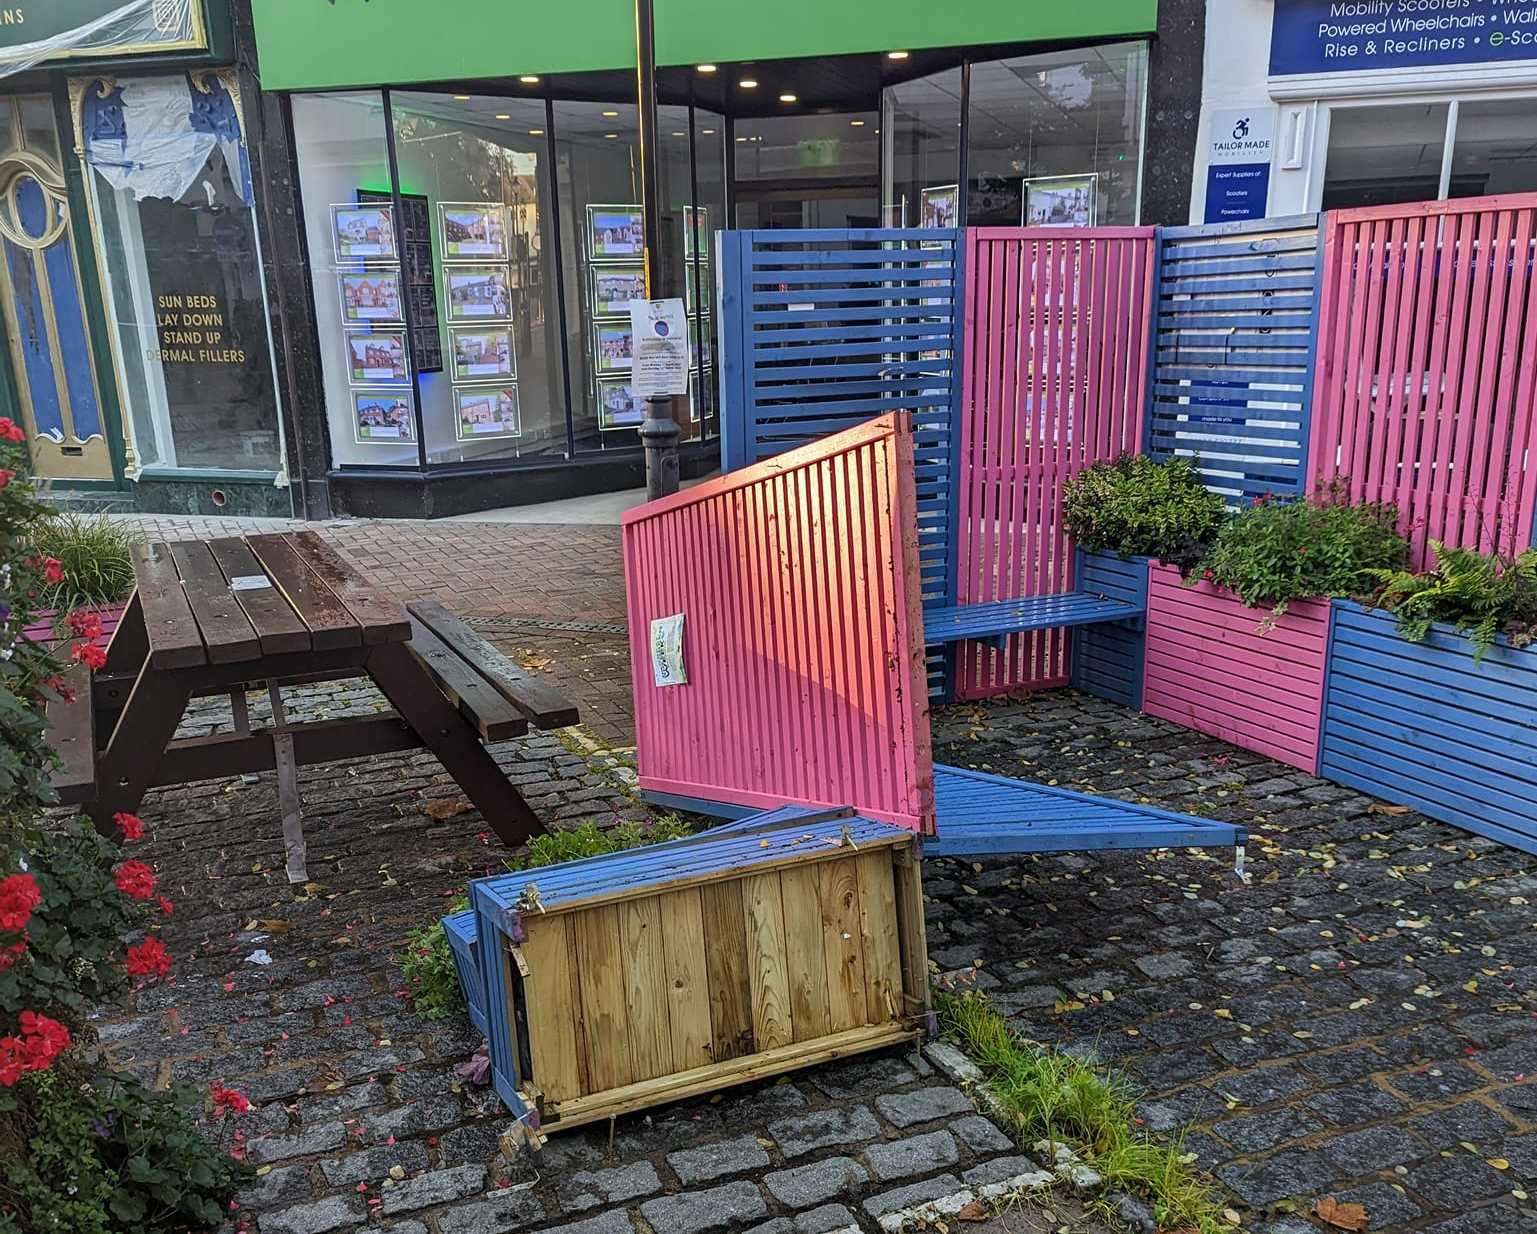 The temporary benches in Ashford have been vandalised. Picture: Heather Atthow